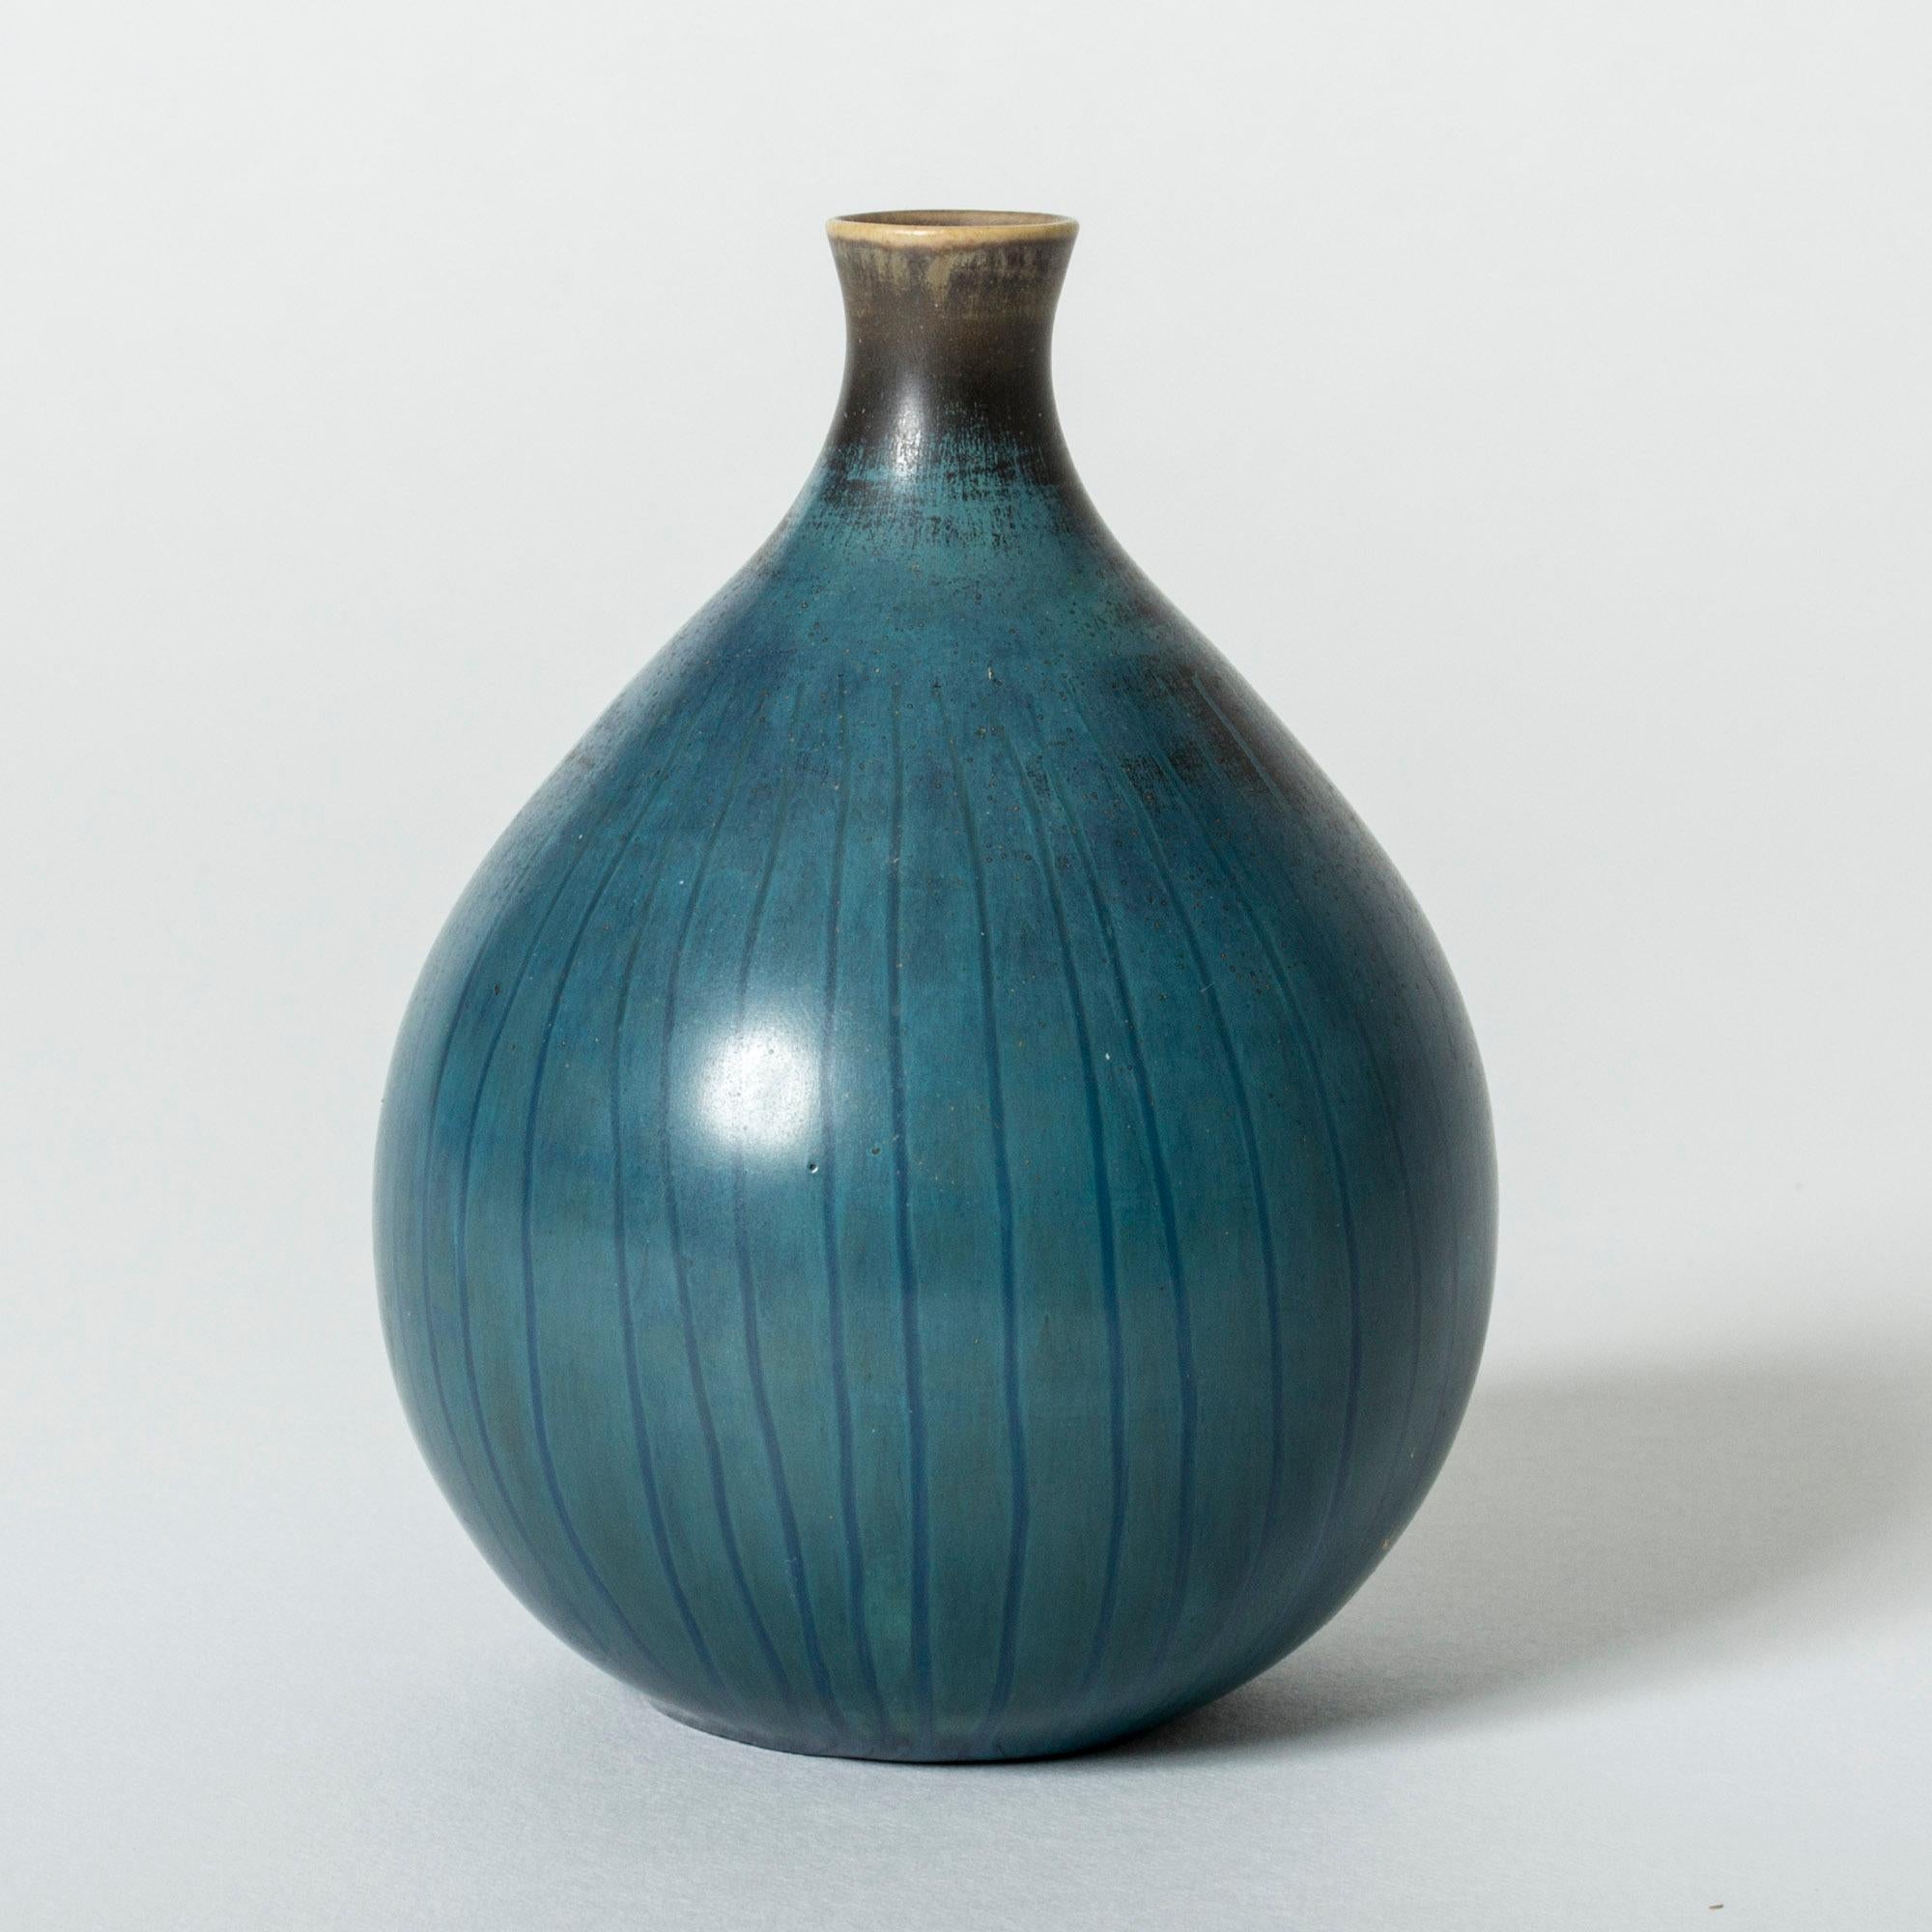 Stoneware vase by Stig Lindberg, in a small, onion shaped form. Blue glaze with subtle stripes, brown around the mouth.